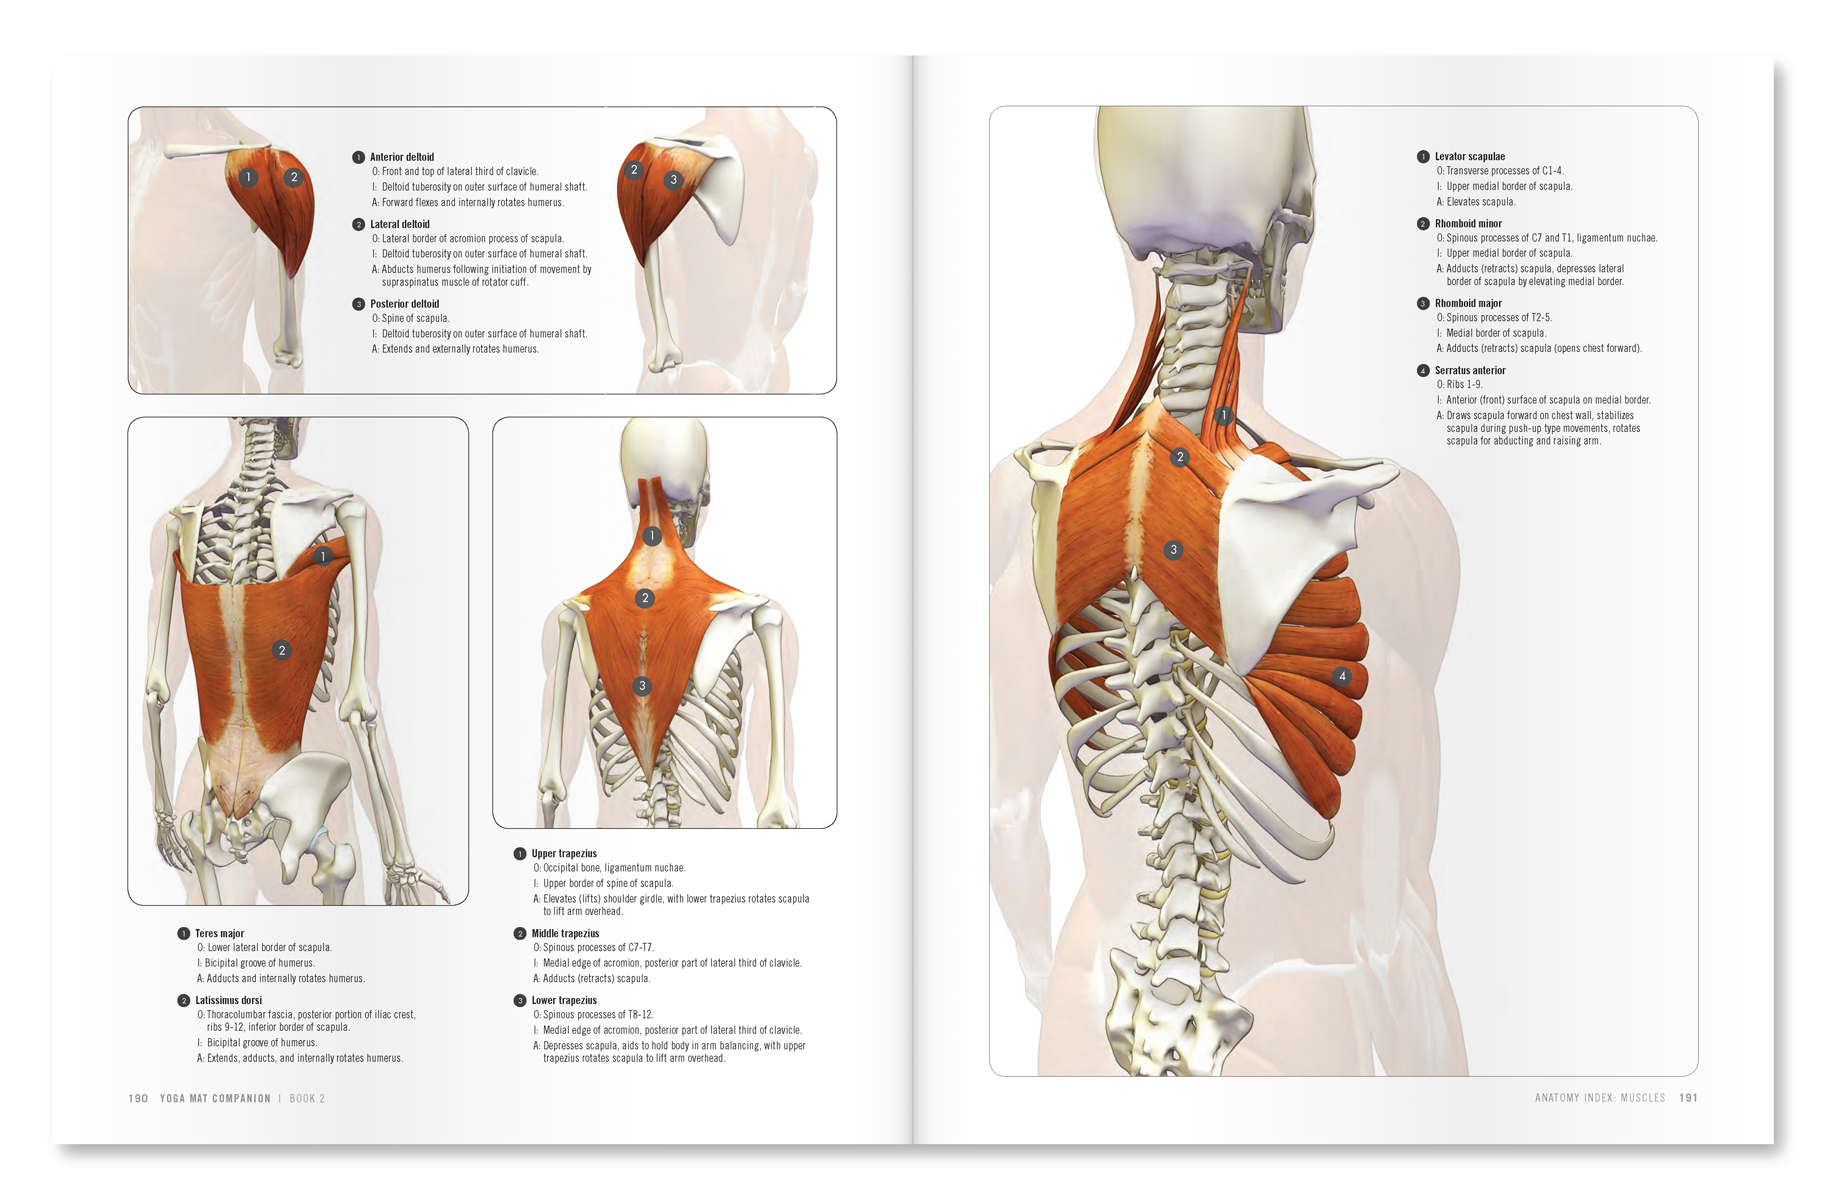 The Daily Bandha: Shoulder Kinematics in Yoga Part II: The Lower Trapezius and Serratus Anterior